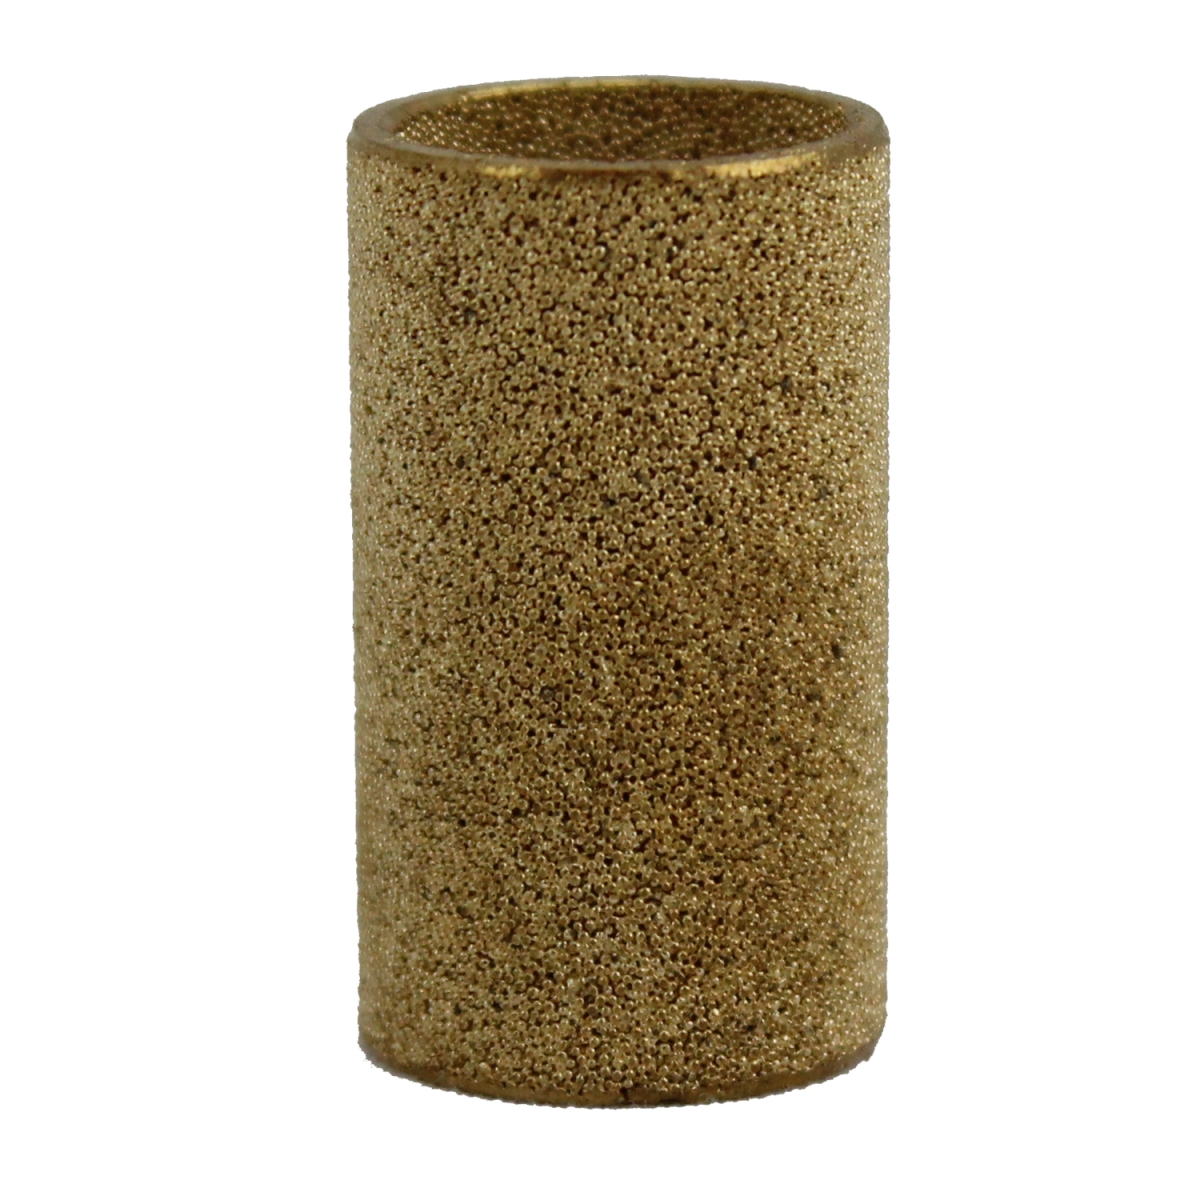 Picture of Milton S-1144-1RP Mini Bronze Filter Element Replacement